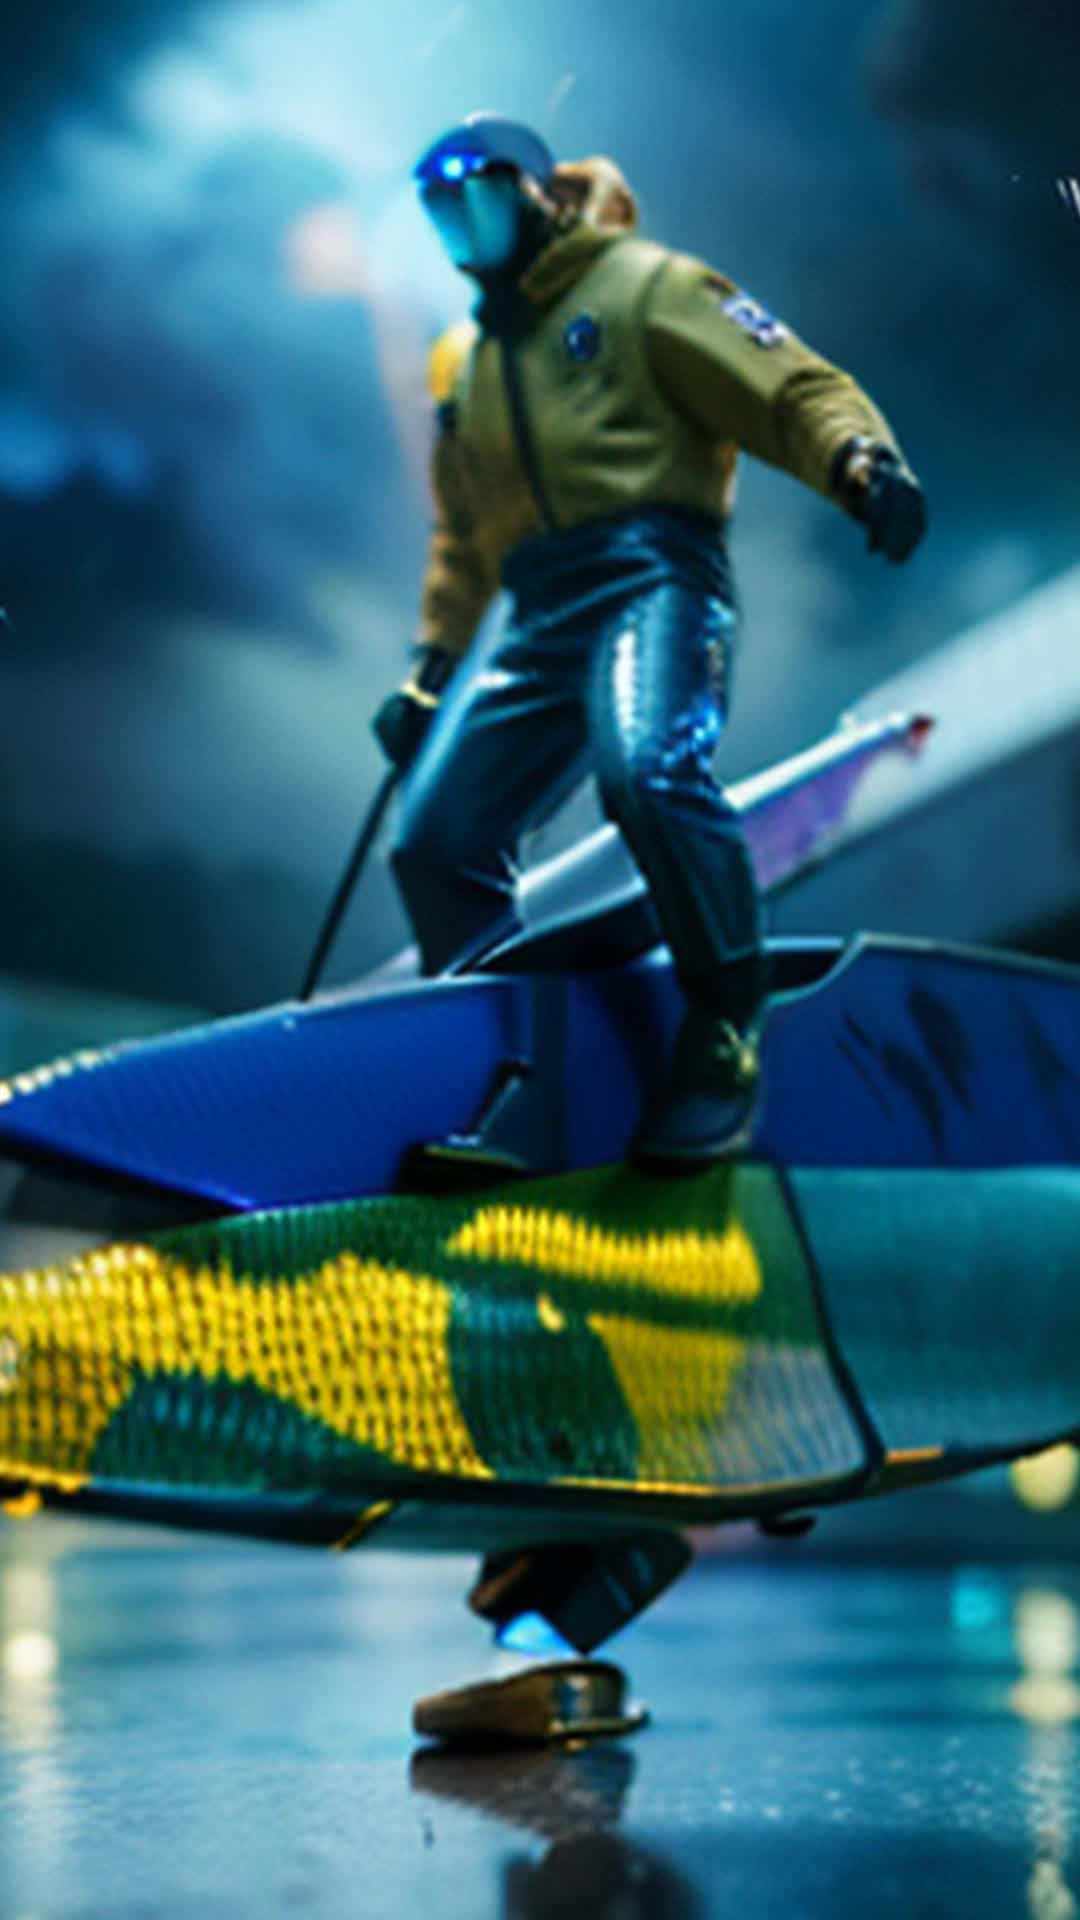 Milo masterfully balancing on holographic surfboard, continuous meteorite downpour from sky, high stakes evasion, earnings increase displayed on device, high-resolution, adrenaline-fueled scene, sharp focus on detailed holographic board and meteorites, dramatic contrast lighting